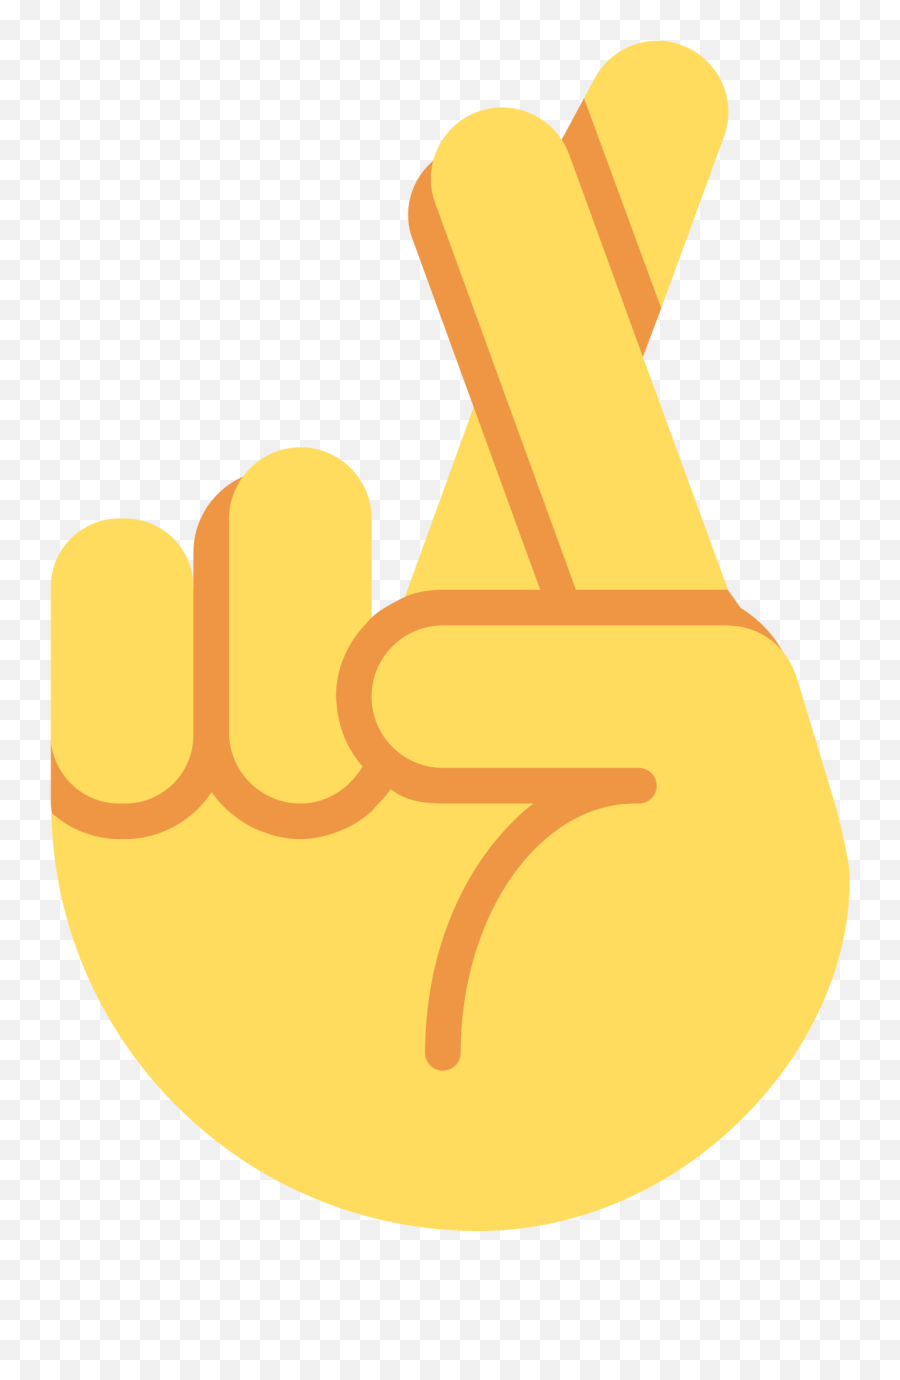 View 23 Fingers Together Emoji Meaning - Fingers Emoji Meaning,Emoticon Two Hands Touching